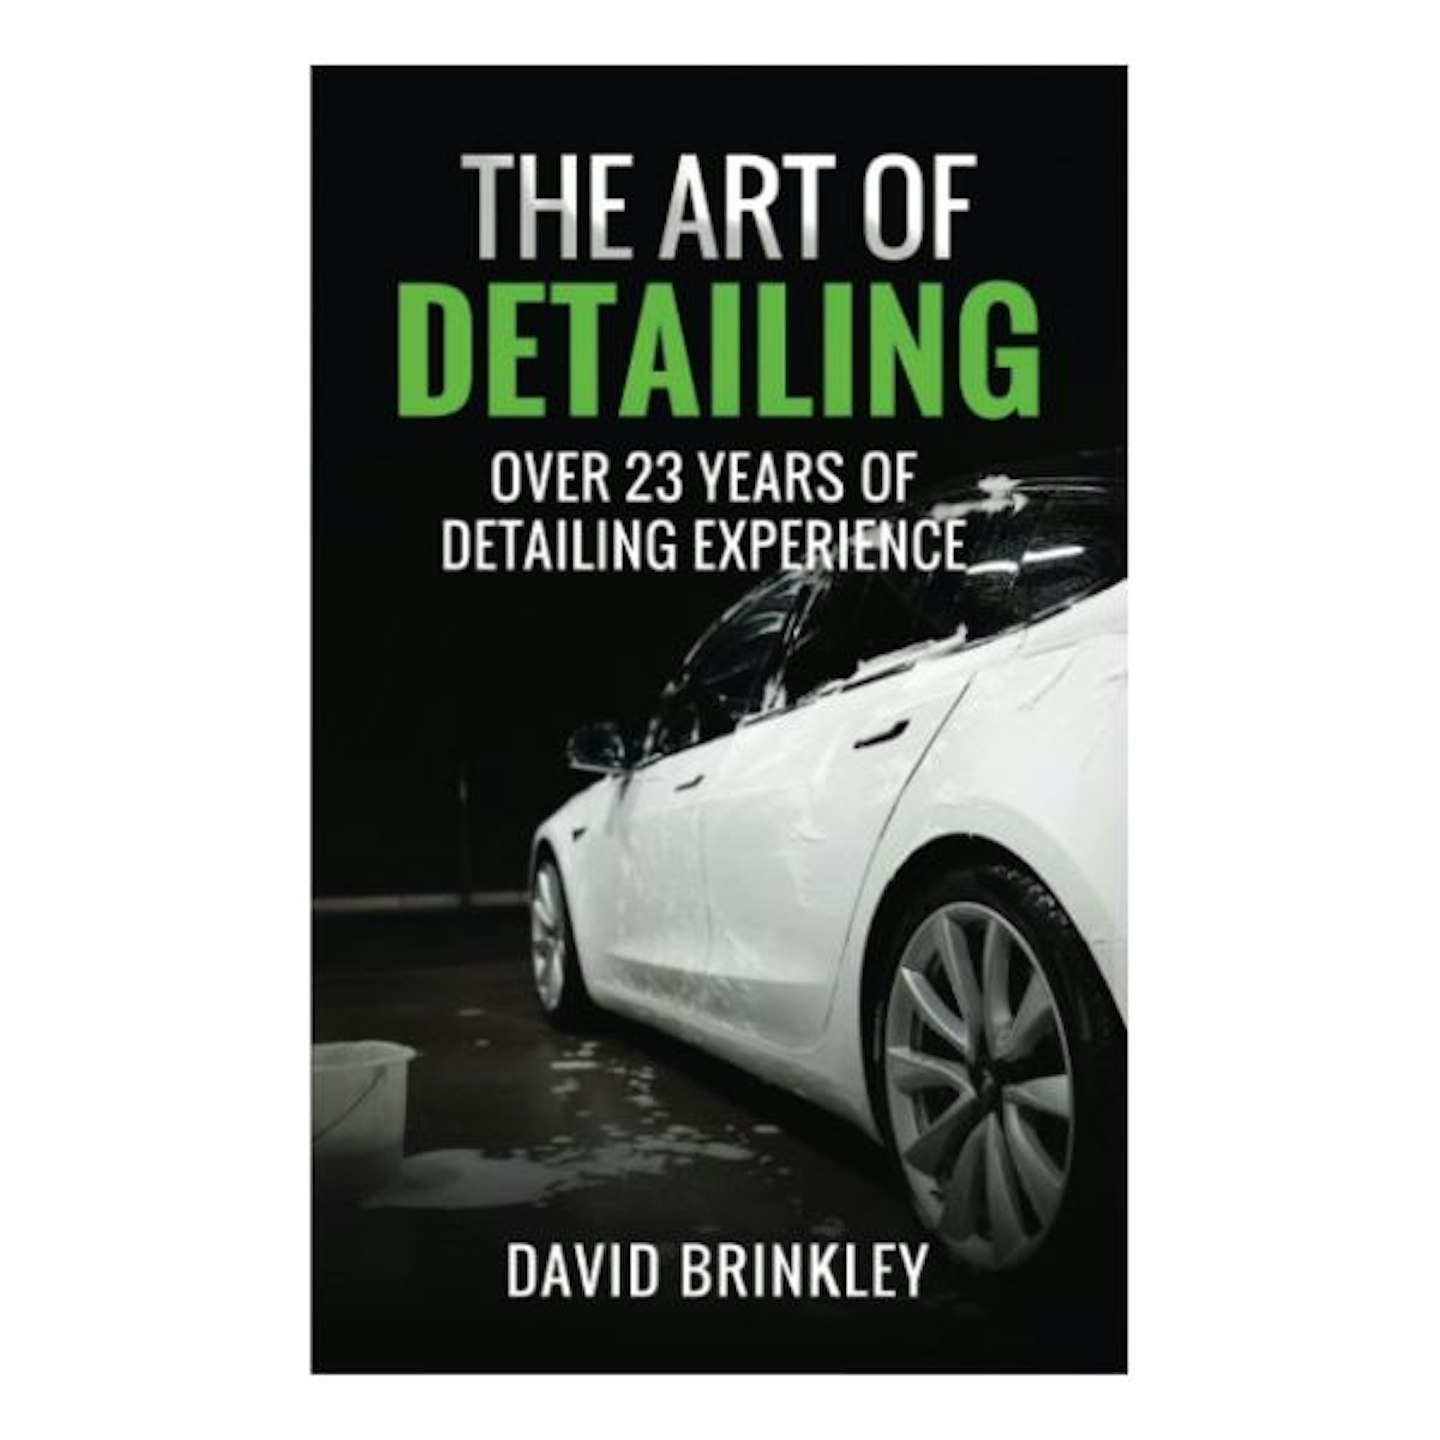 THE ART OF DETAILING